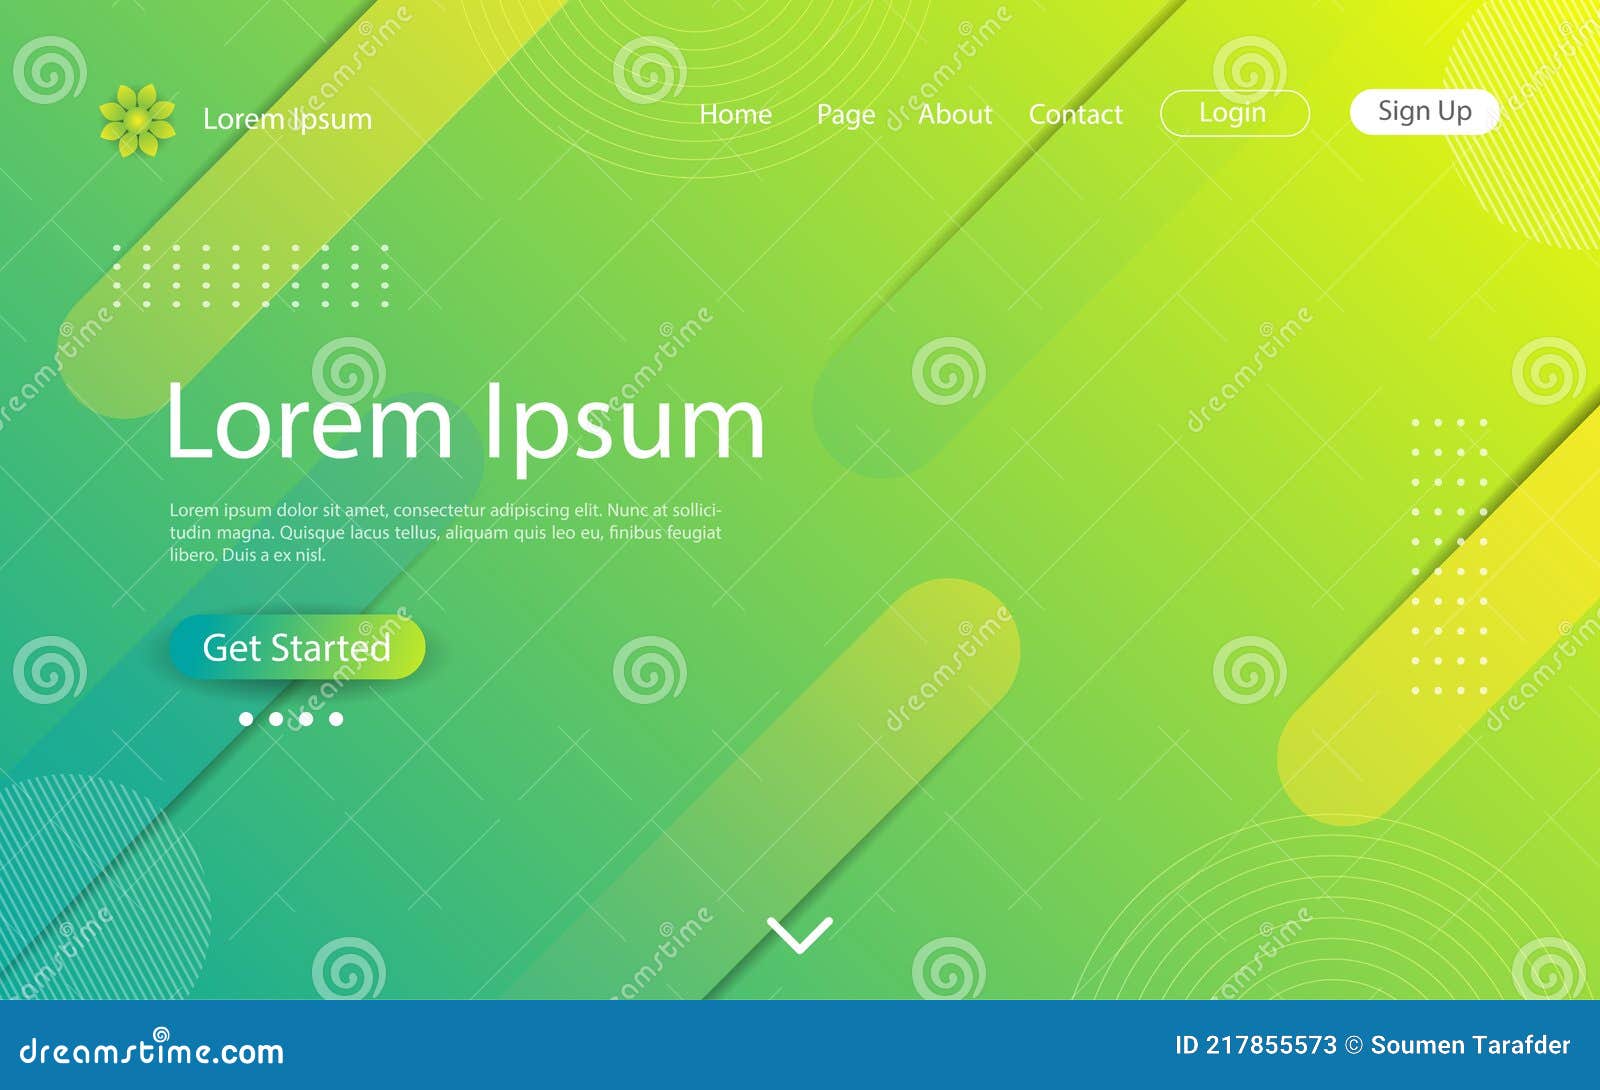 Website Landing Page Design with Abstract Geometric and Dynamic Shapes ...